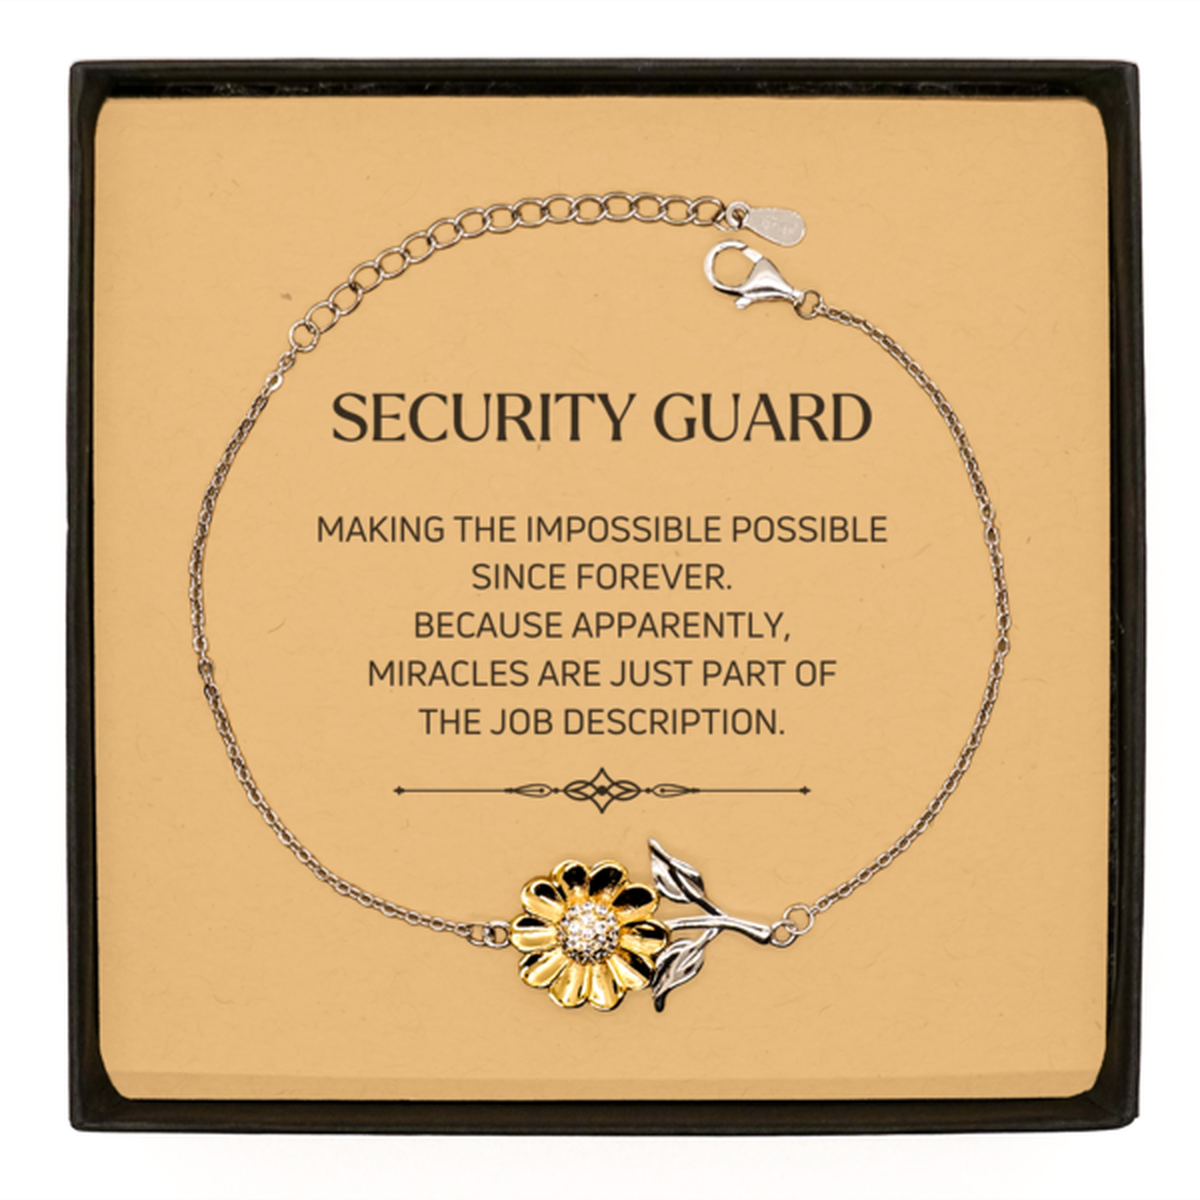 Funny Security Guard Gifts, Miracles are just part of the job description, Inspirational Birthday Sunflower Bracelet For Security Guard, Men, Women, Coworkers, Friends, Boss